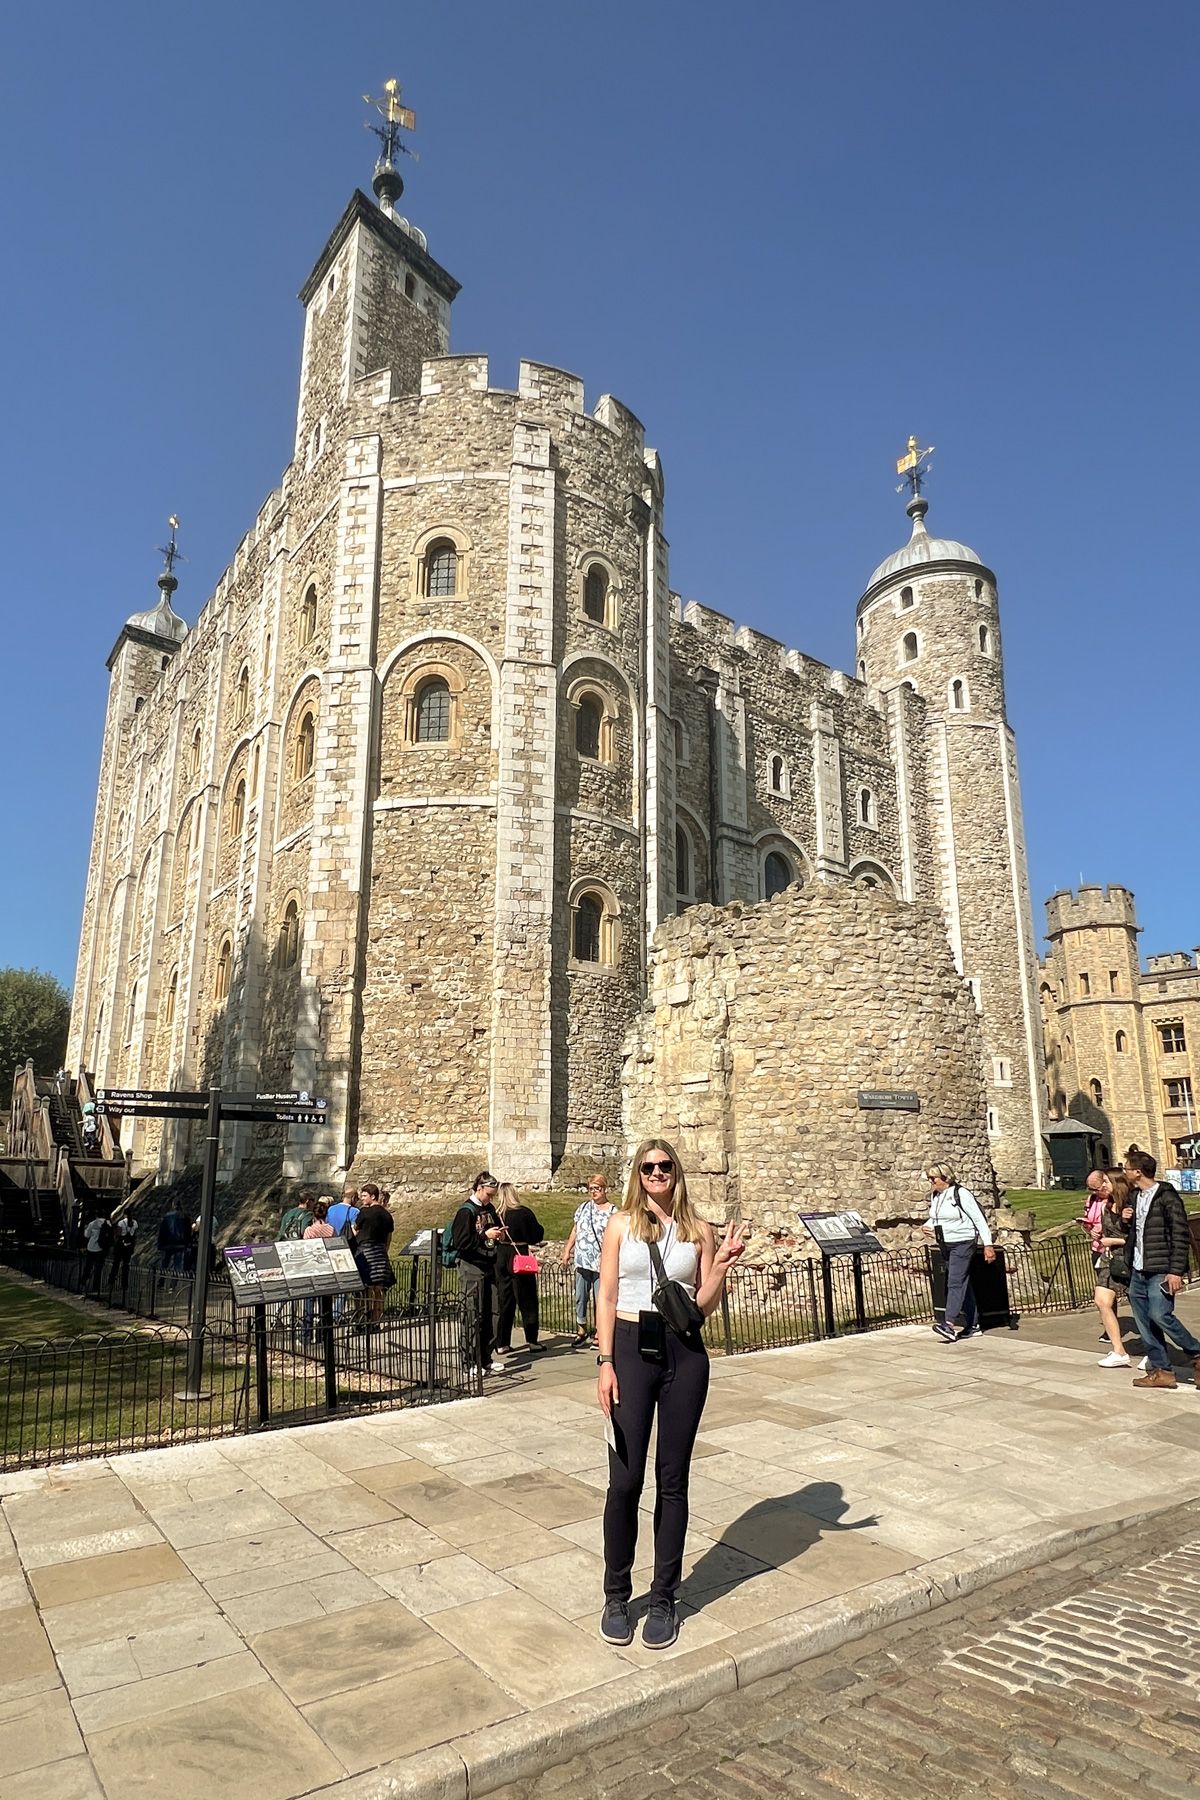 A young woman in black pants and a white tank top stands in front of the Tower of London on a sunny day.